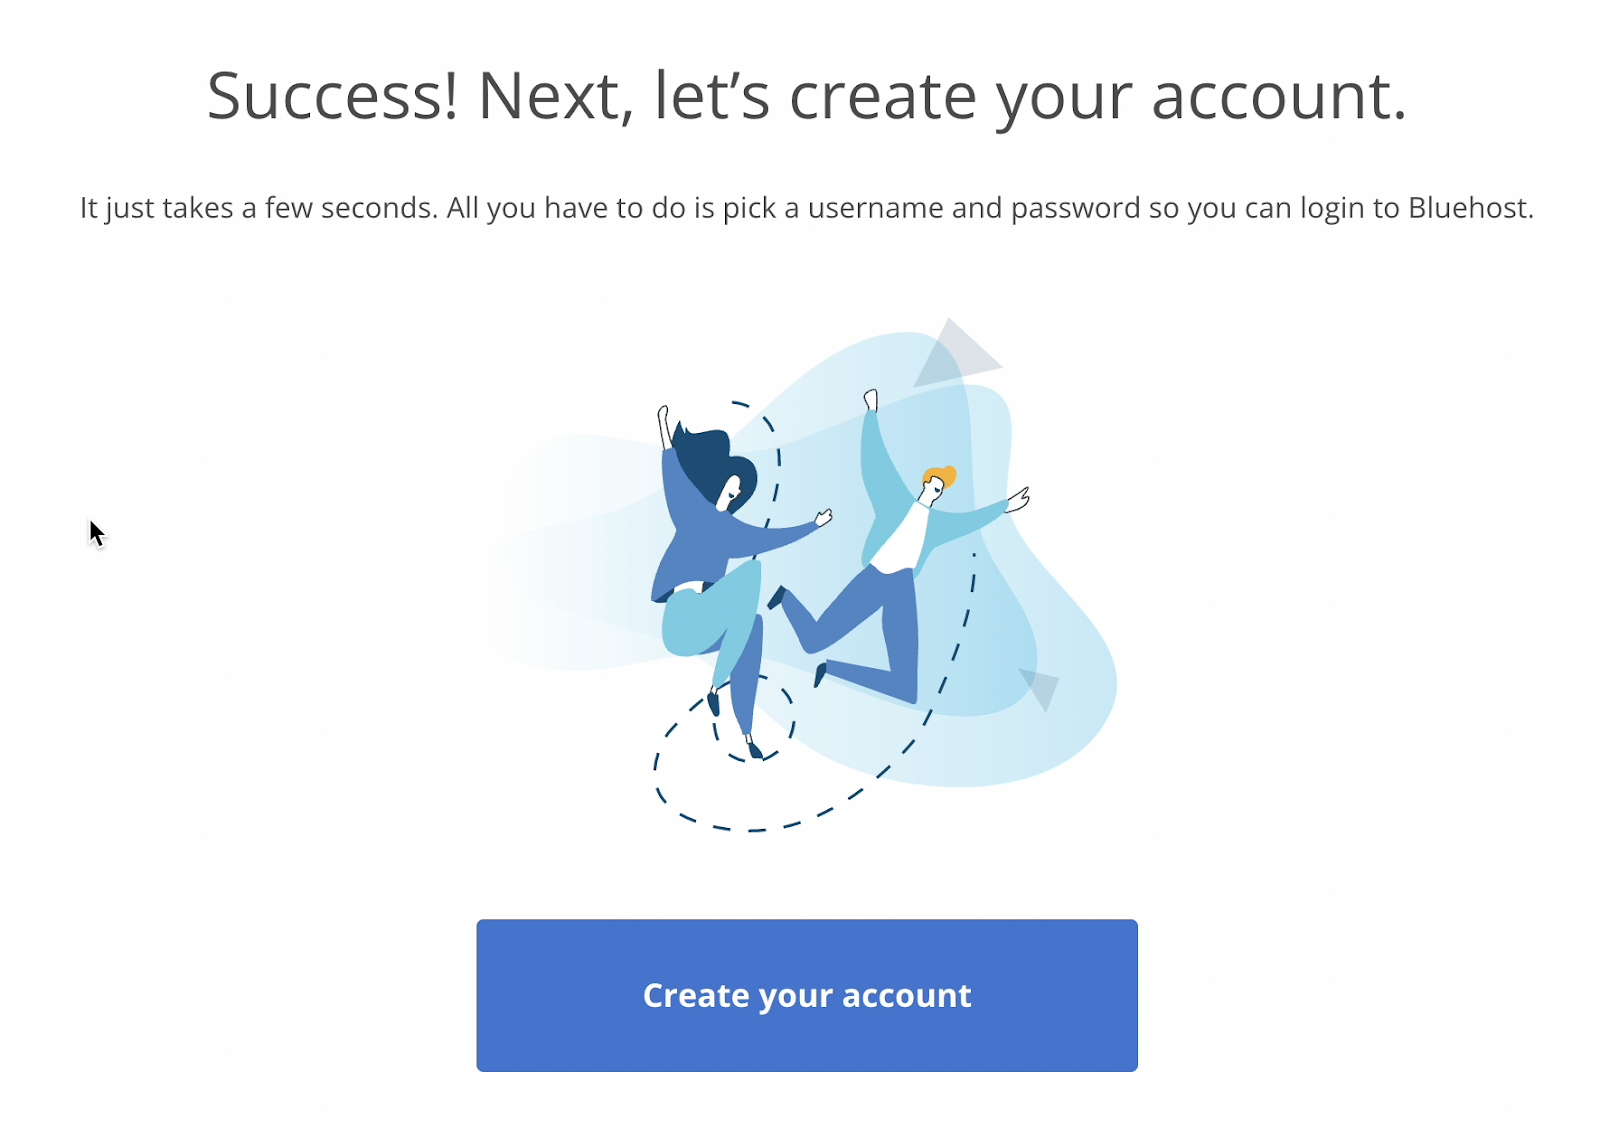 Bluehost create your account